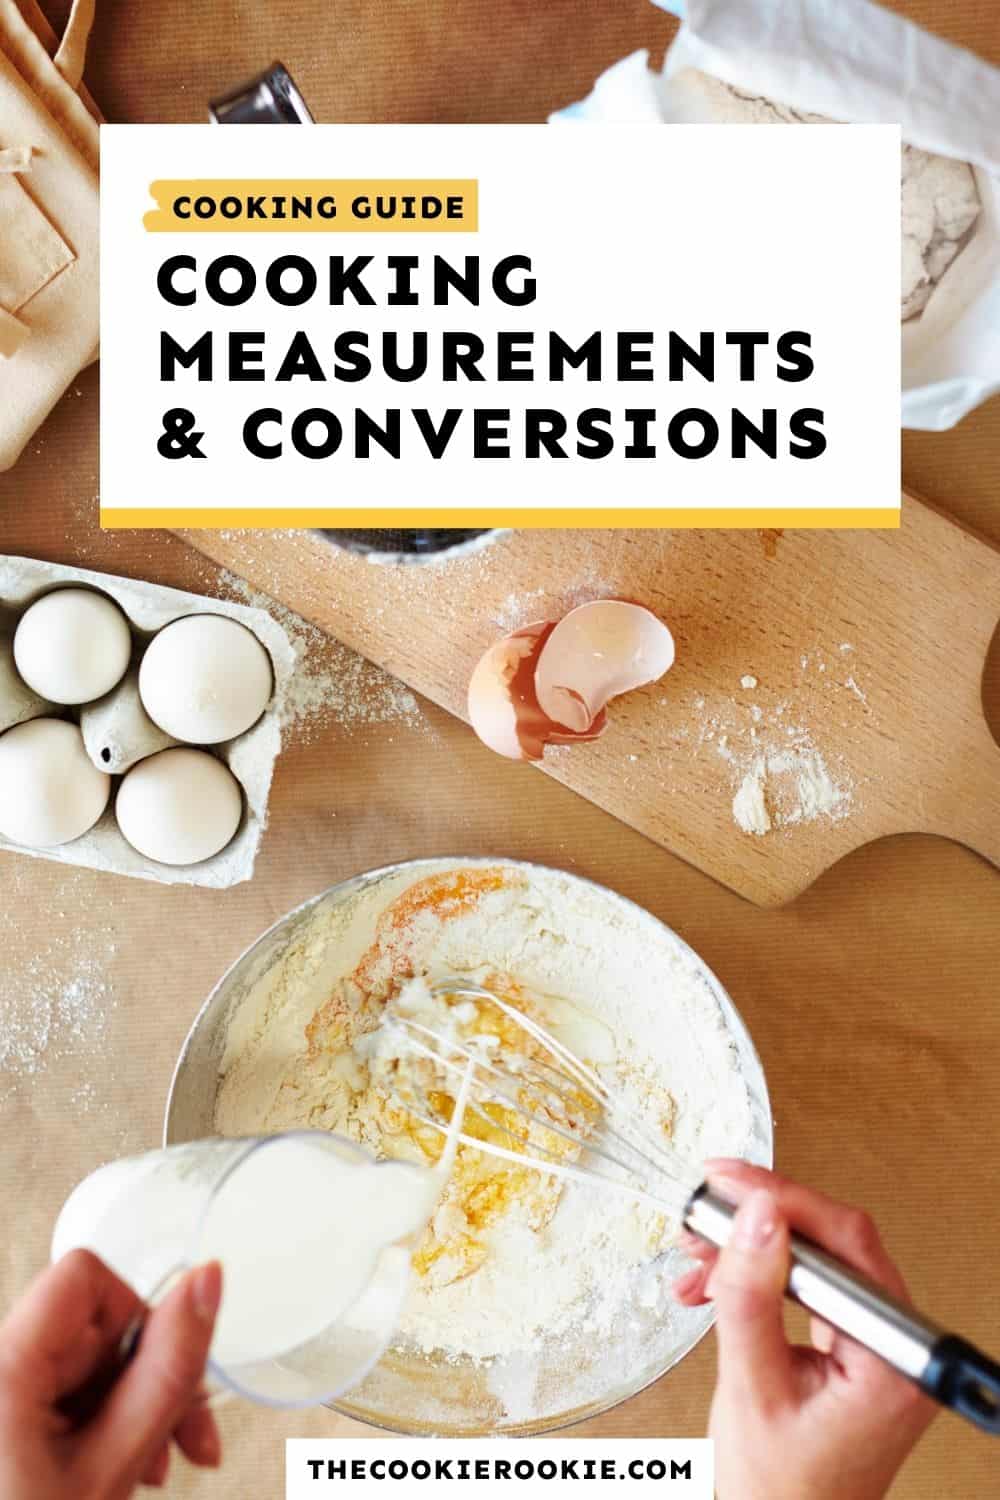 https://www.thecookierookie.com/wp-content/uploads/2017/07/basic-cooking-conversions.jpg